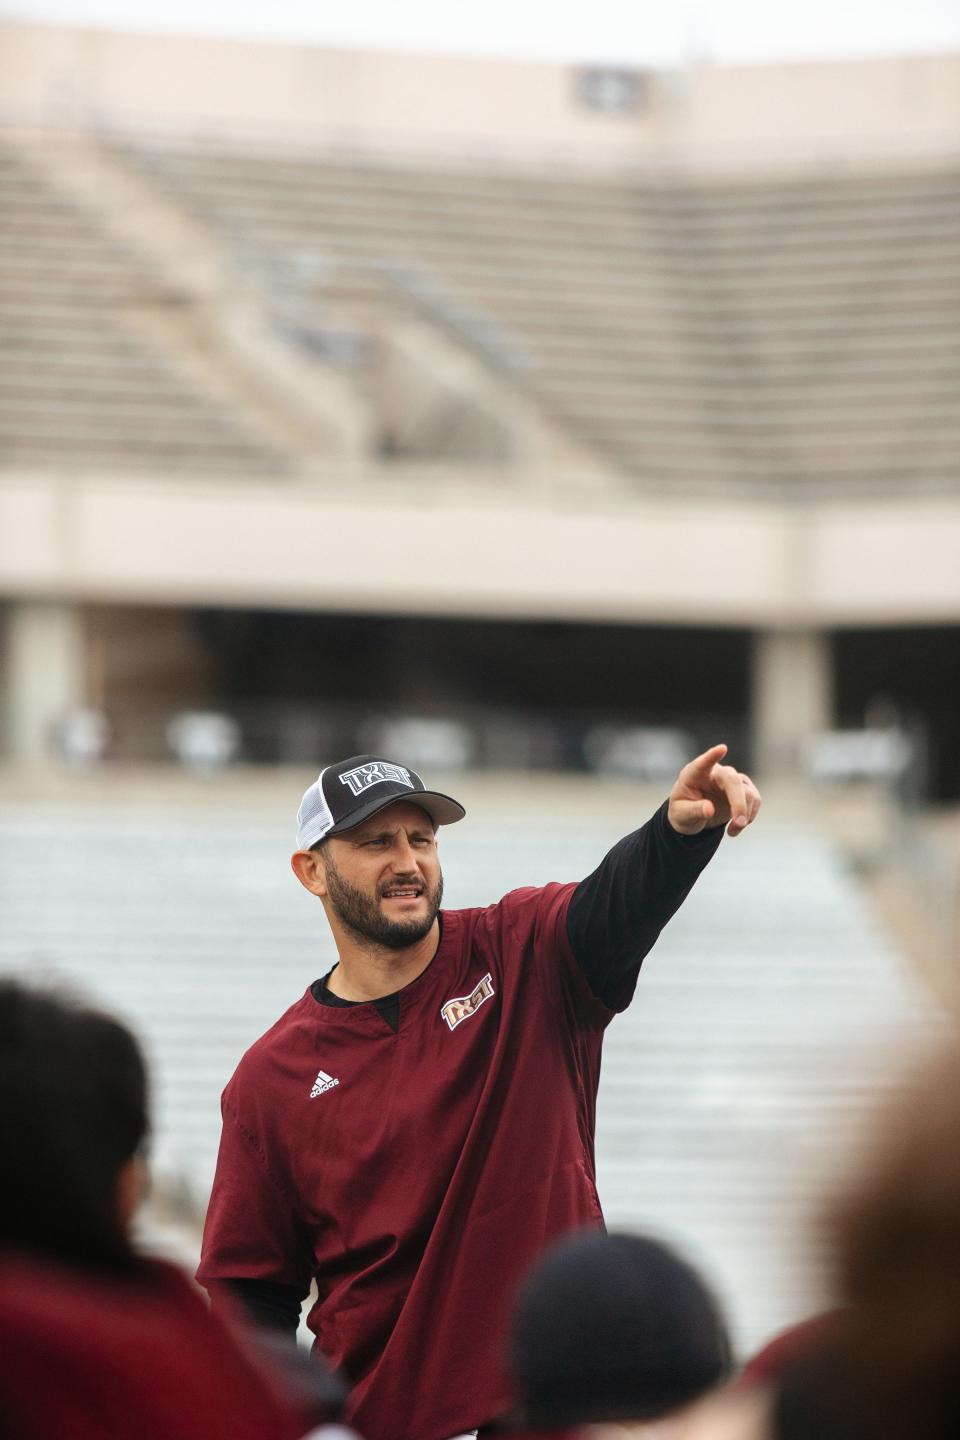 Texas State coach G.J. Kinne led the Bobcats from a 17-0 halftime deficit to a 35-24 win over Nevada on Saturday. Texas State is 3-1 for the first time since 2013.